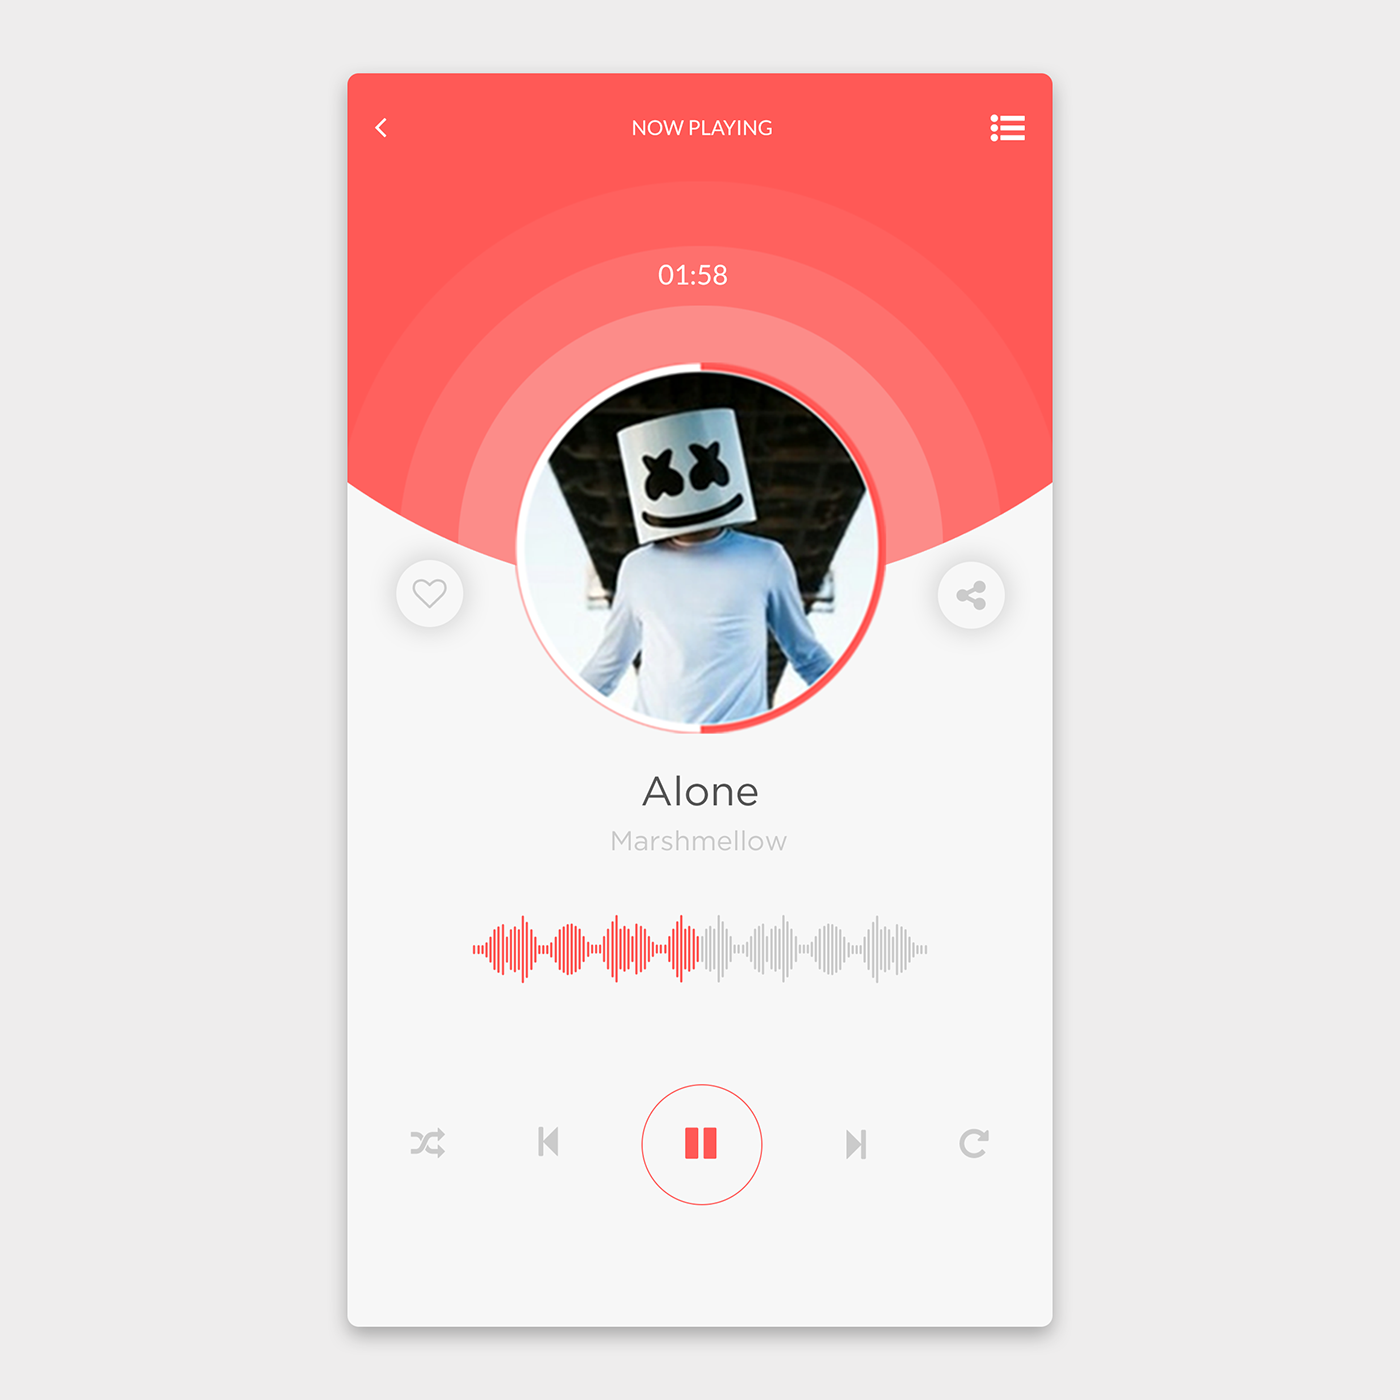 UI ux app mobile user interface Music Player